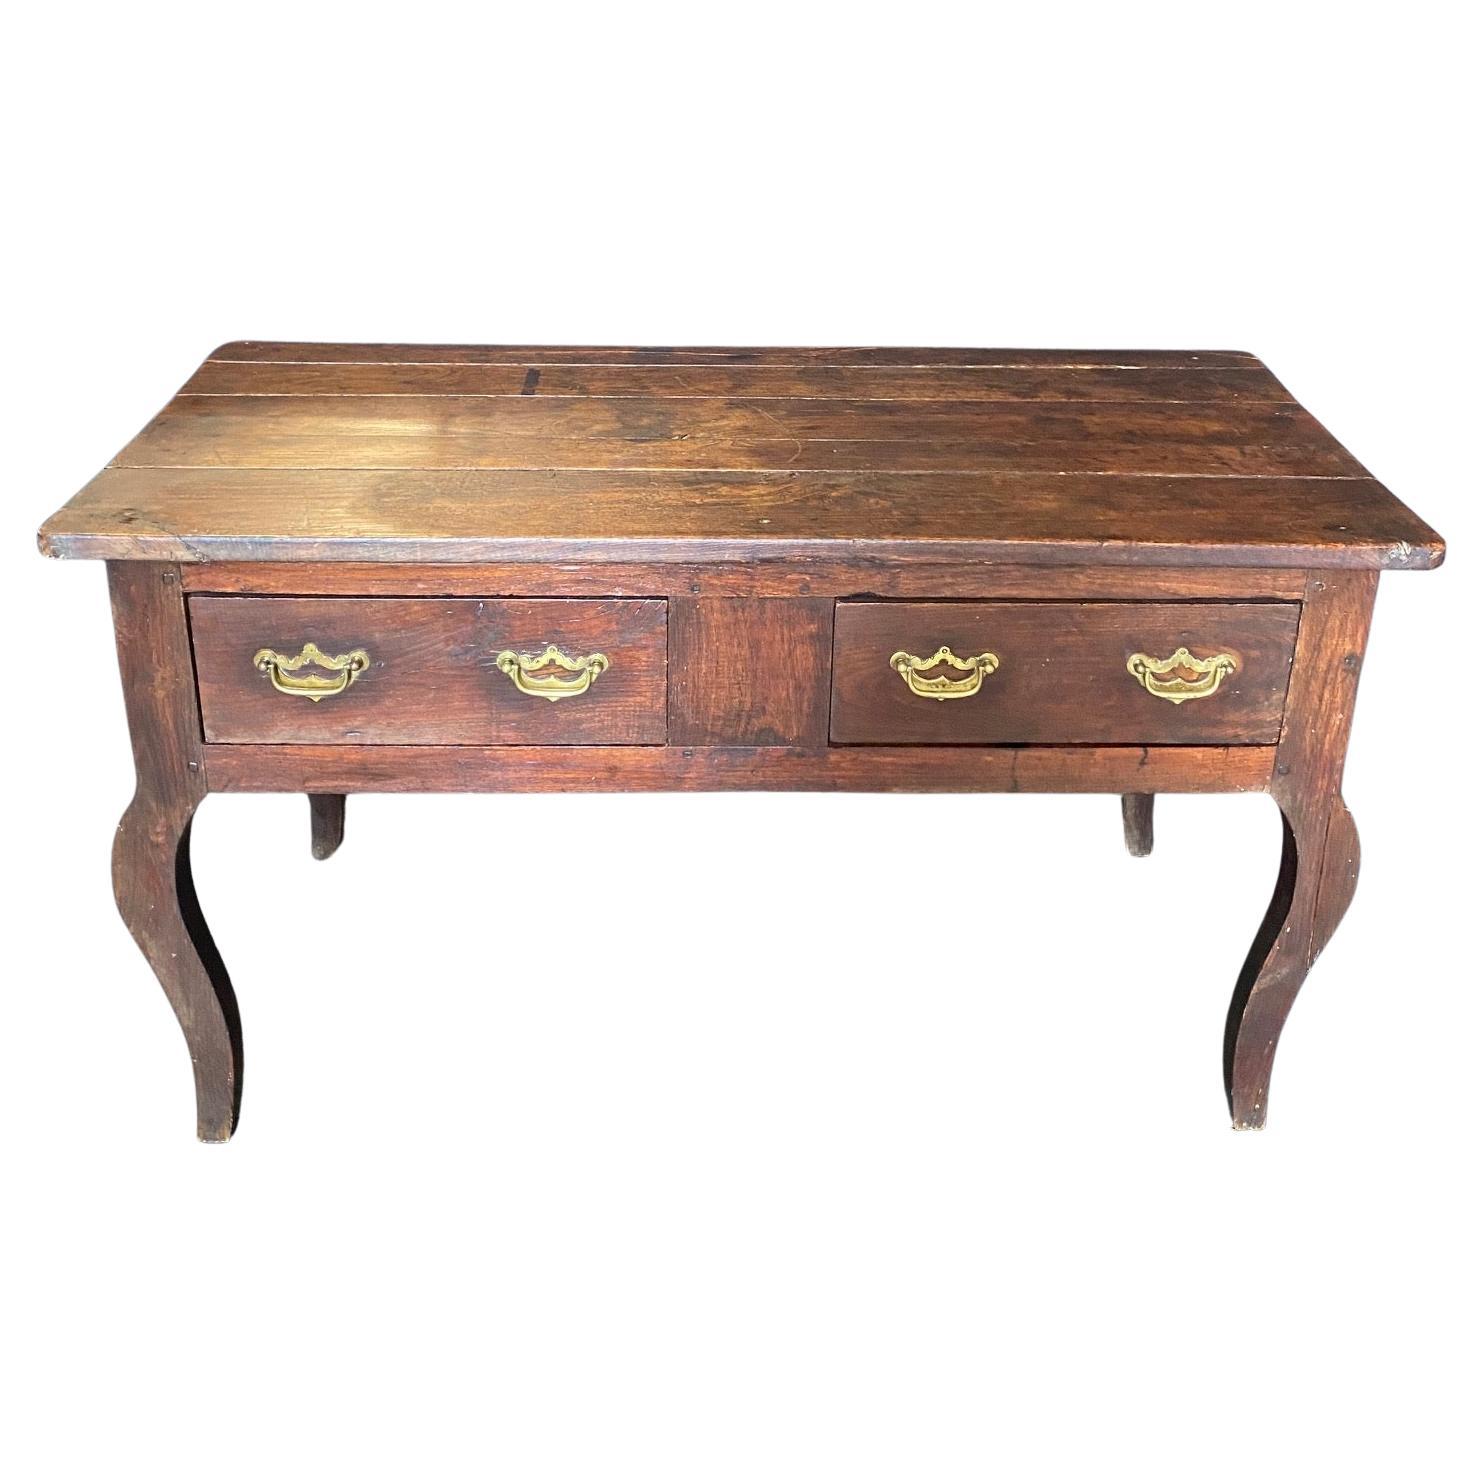  Antique Louis XV Style Provincial Console Table Sideboard Buffet  For Sale